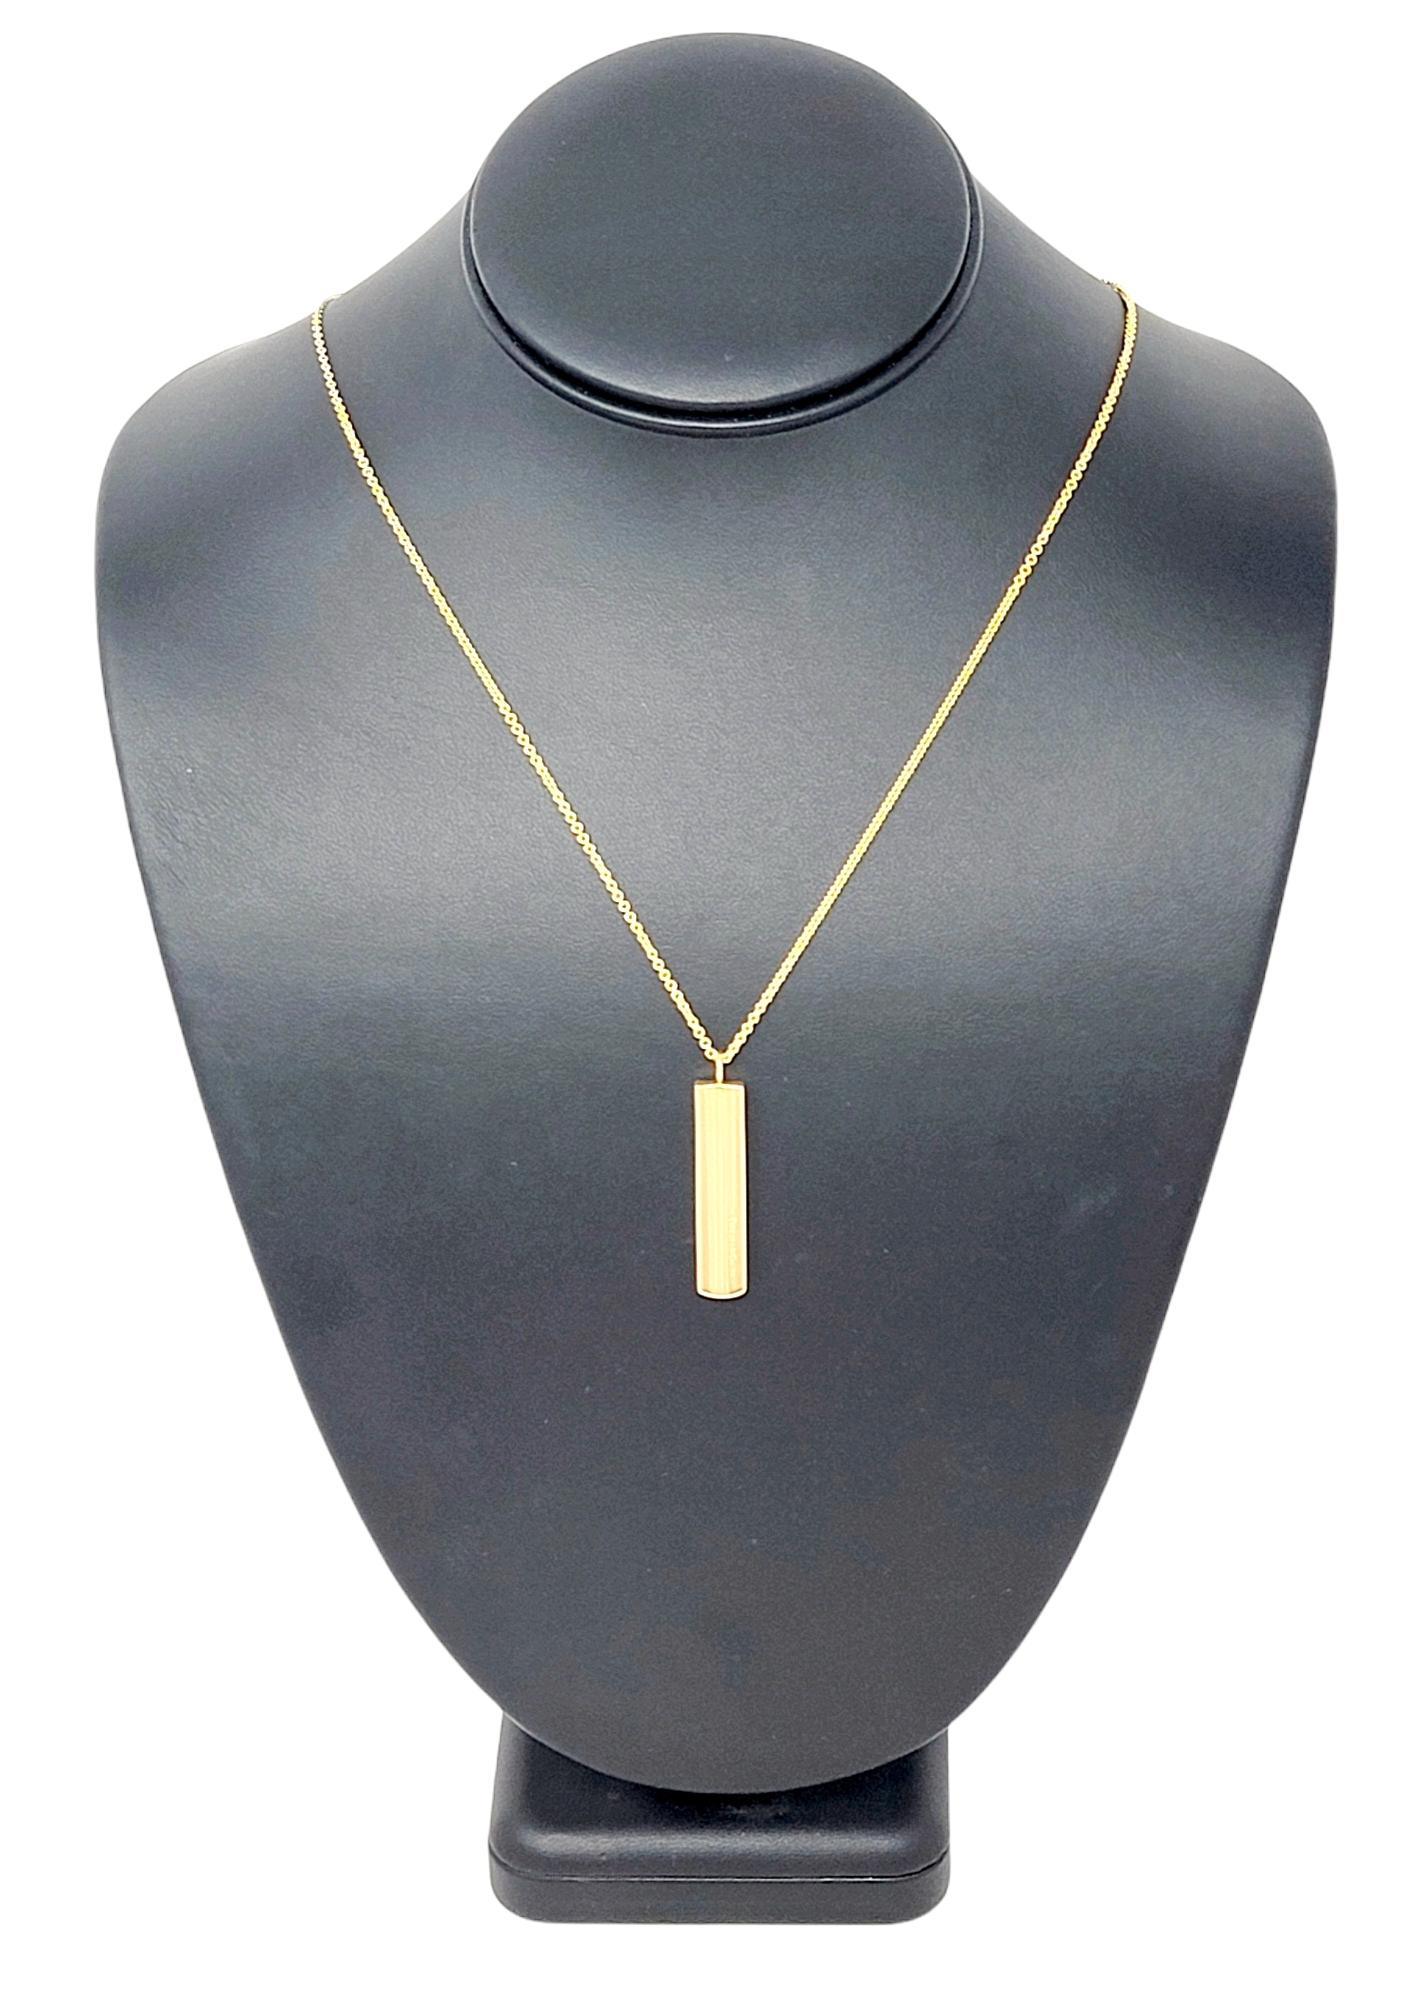 Tiffany & Co. 1837 Vertical Bar Pendant Necklace in 18 Karat Yellow Gold 2